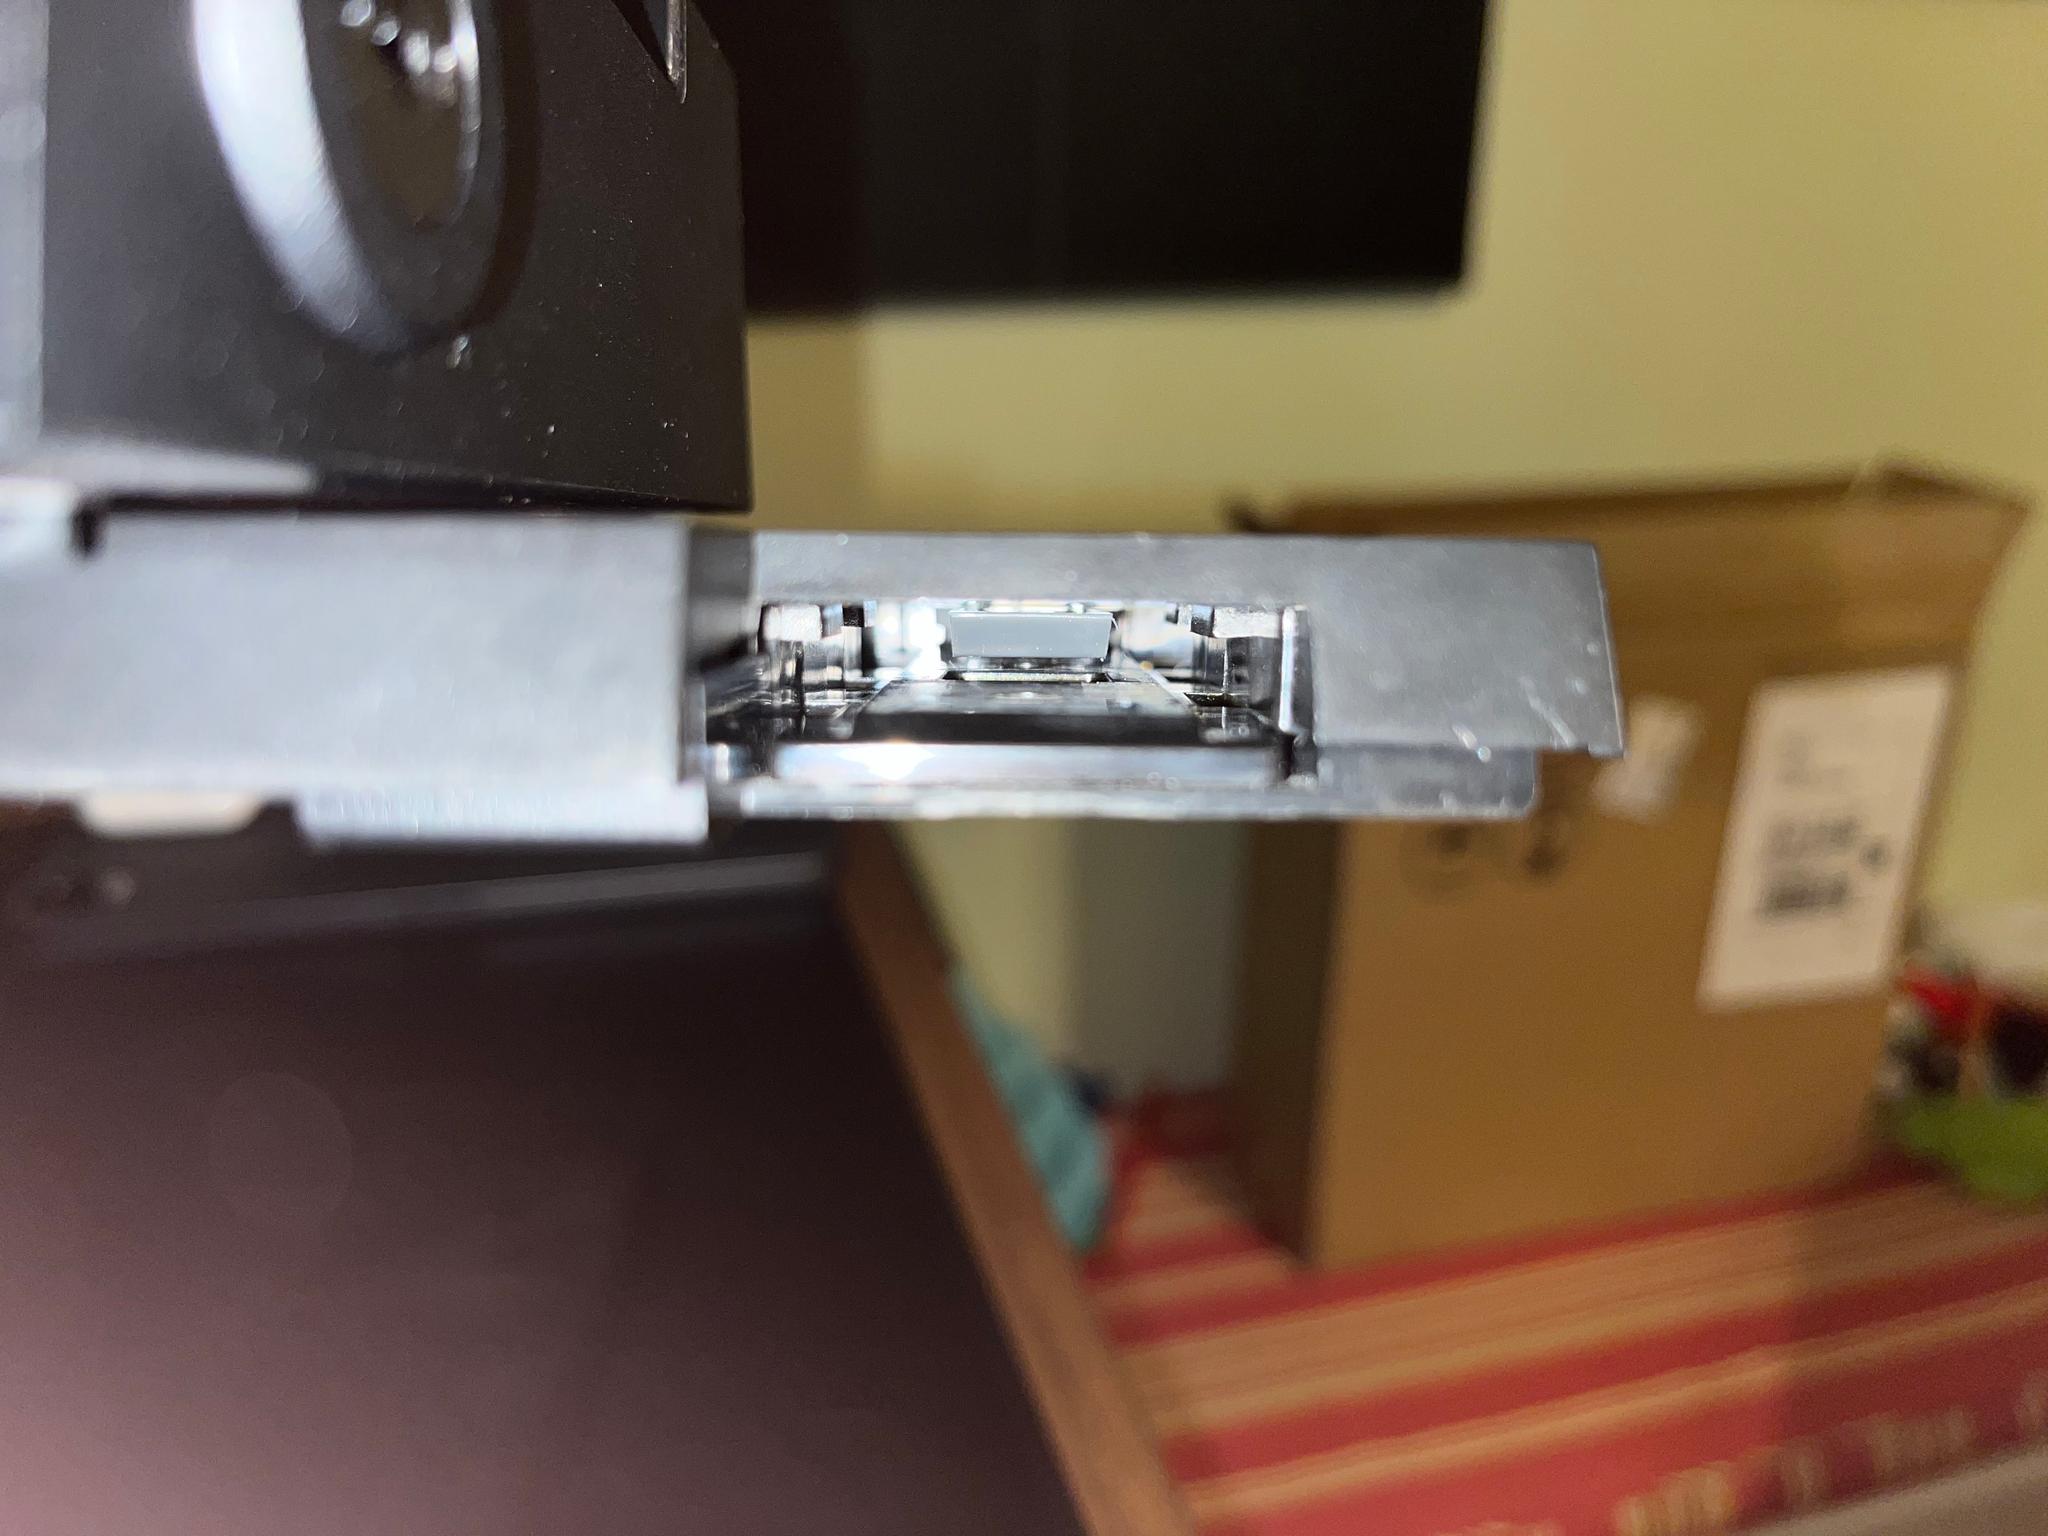 View of insert in laptop stand.